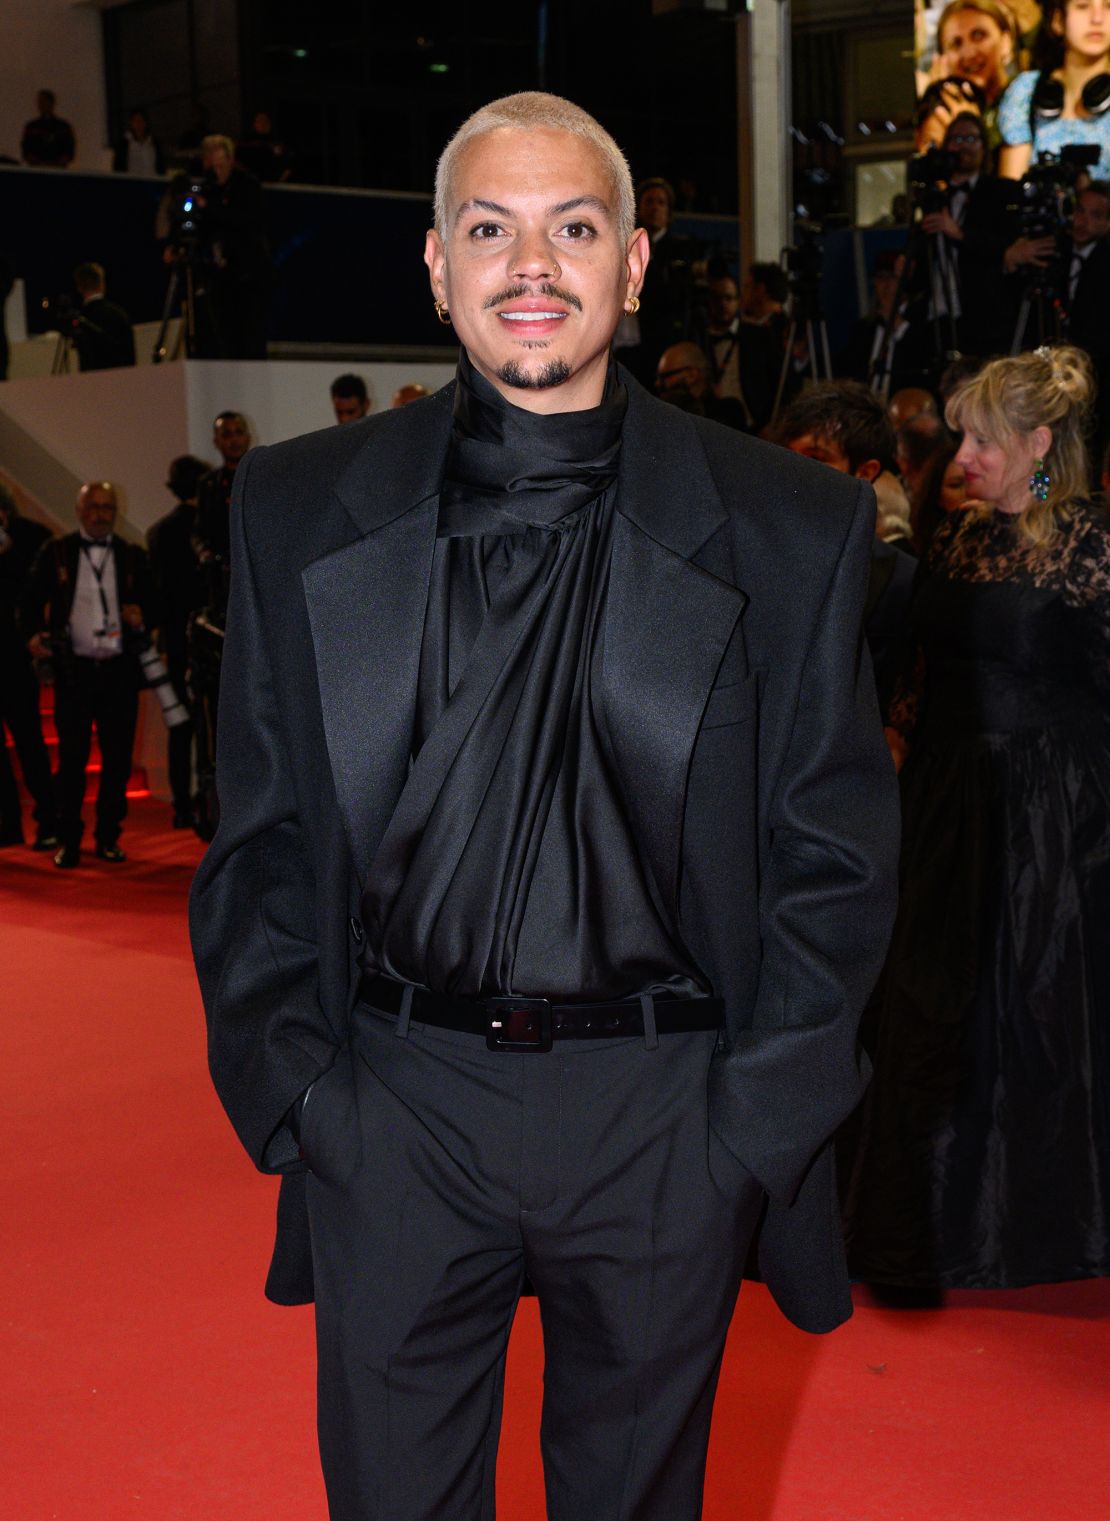 Evan Ross in YSL on May 21.